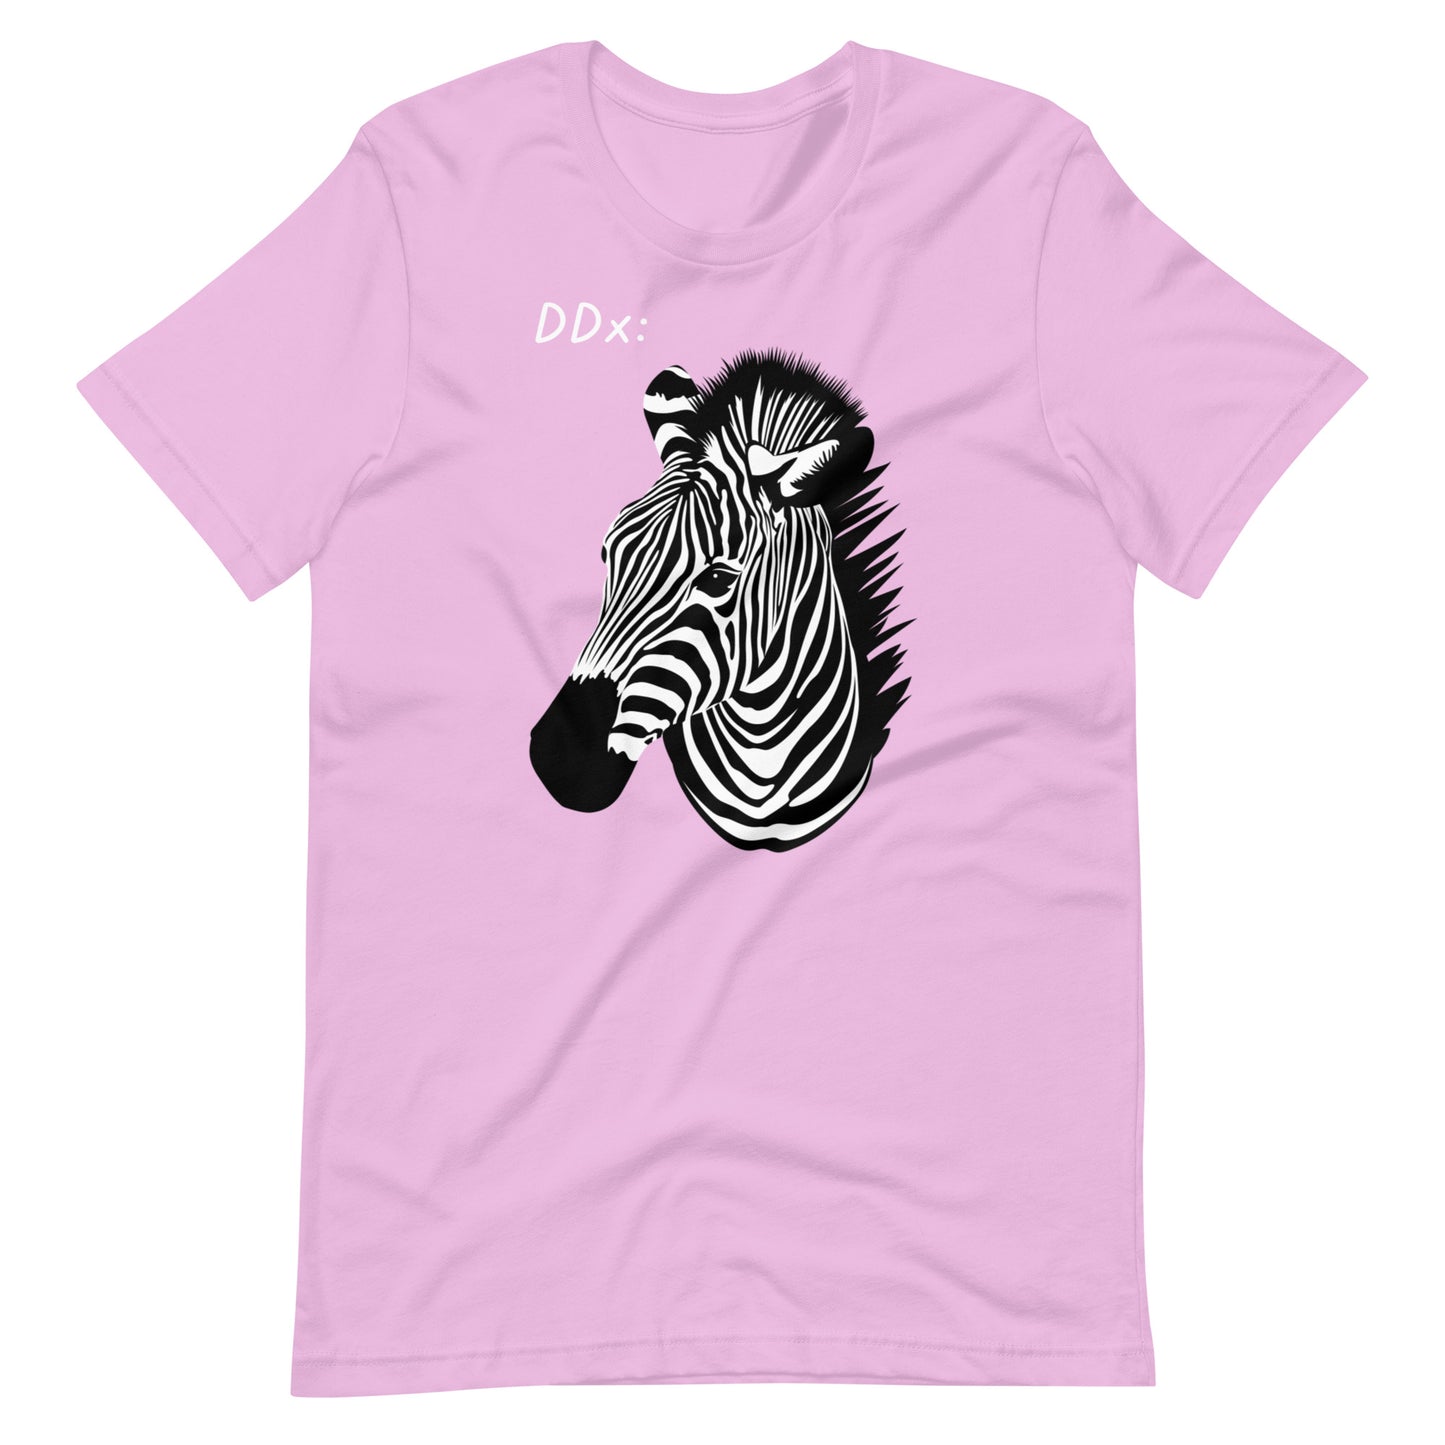 Graphic Tee, Zebra, Internal Medicine, Differential Diagnosis, Funny Doctor Shirt, Medical Student, Funny Nurse Shirt, Funny Resident Shirt, Doctor, Physician, Resident, Nurse, PA, NP, Medical Student